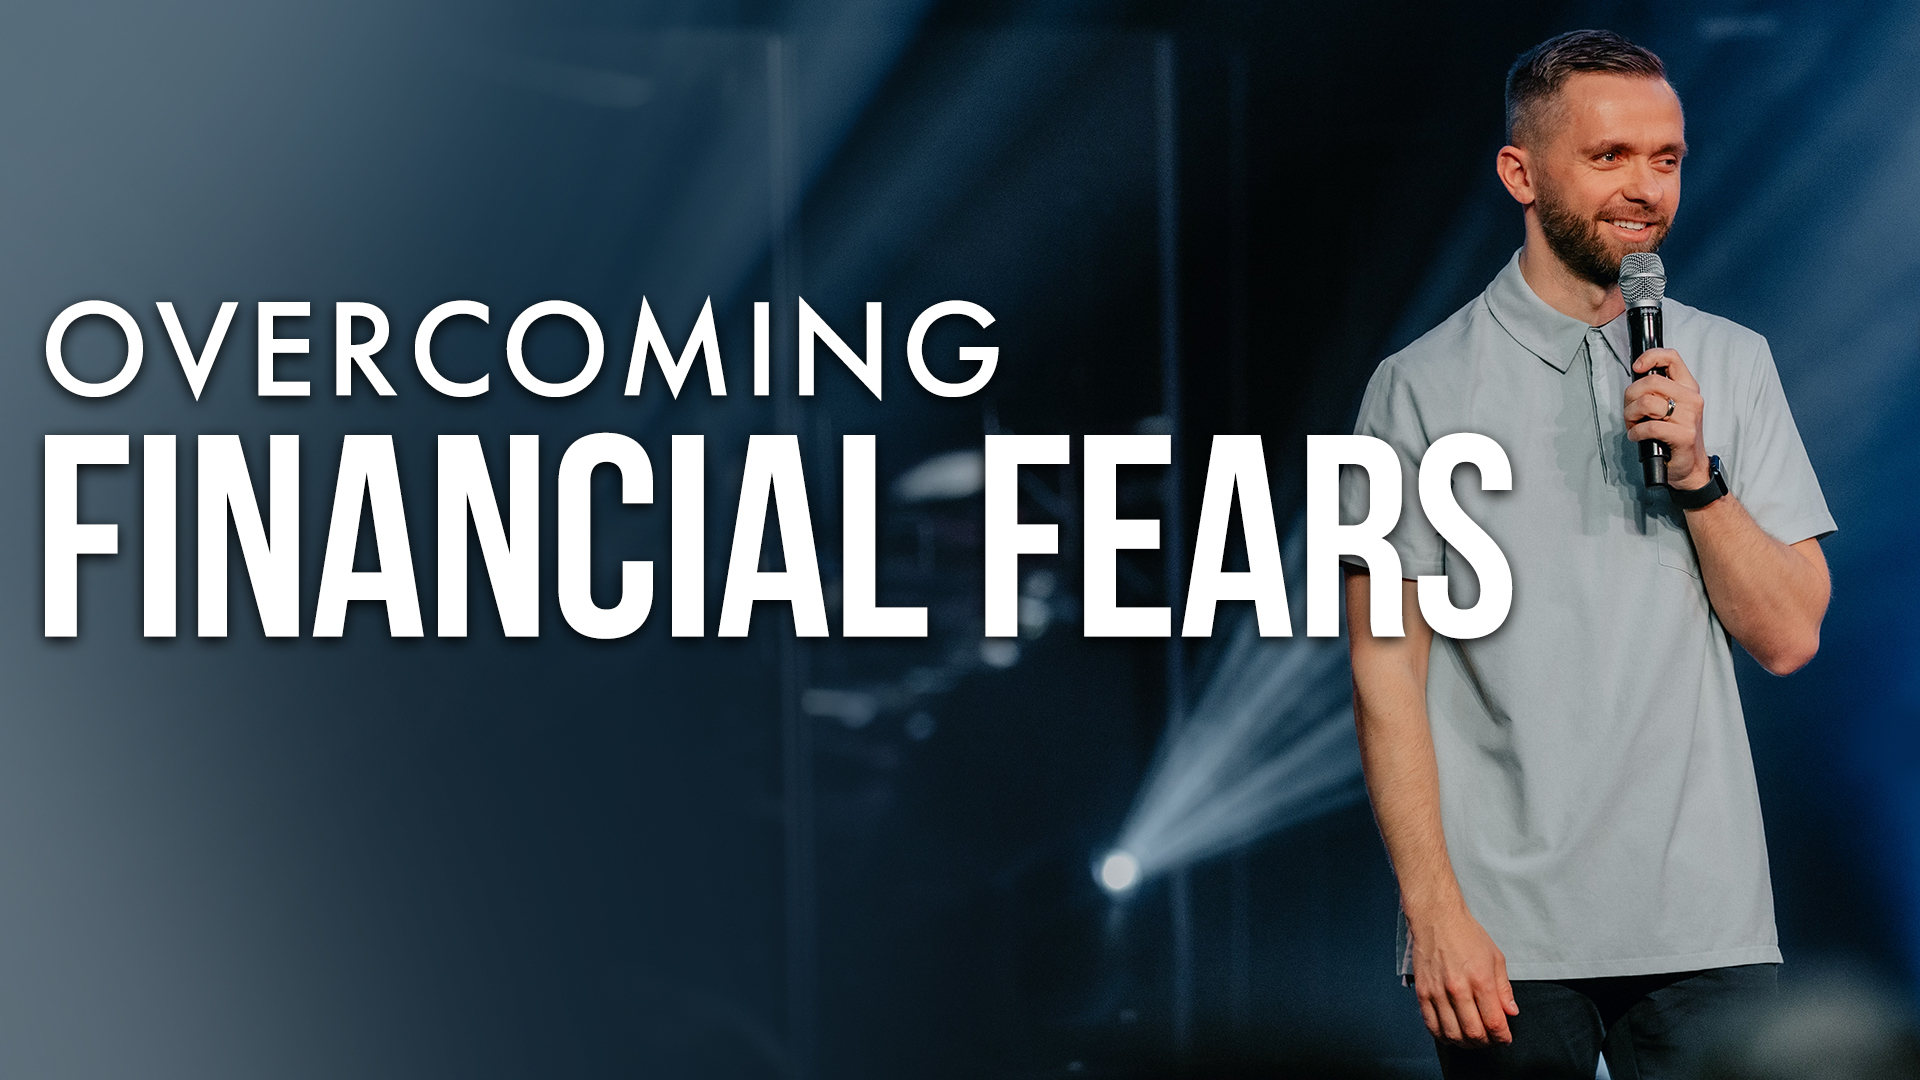 Featured image for “Overcoming Financial Fears”